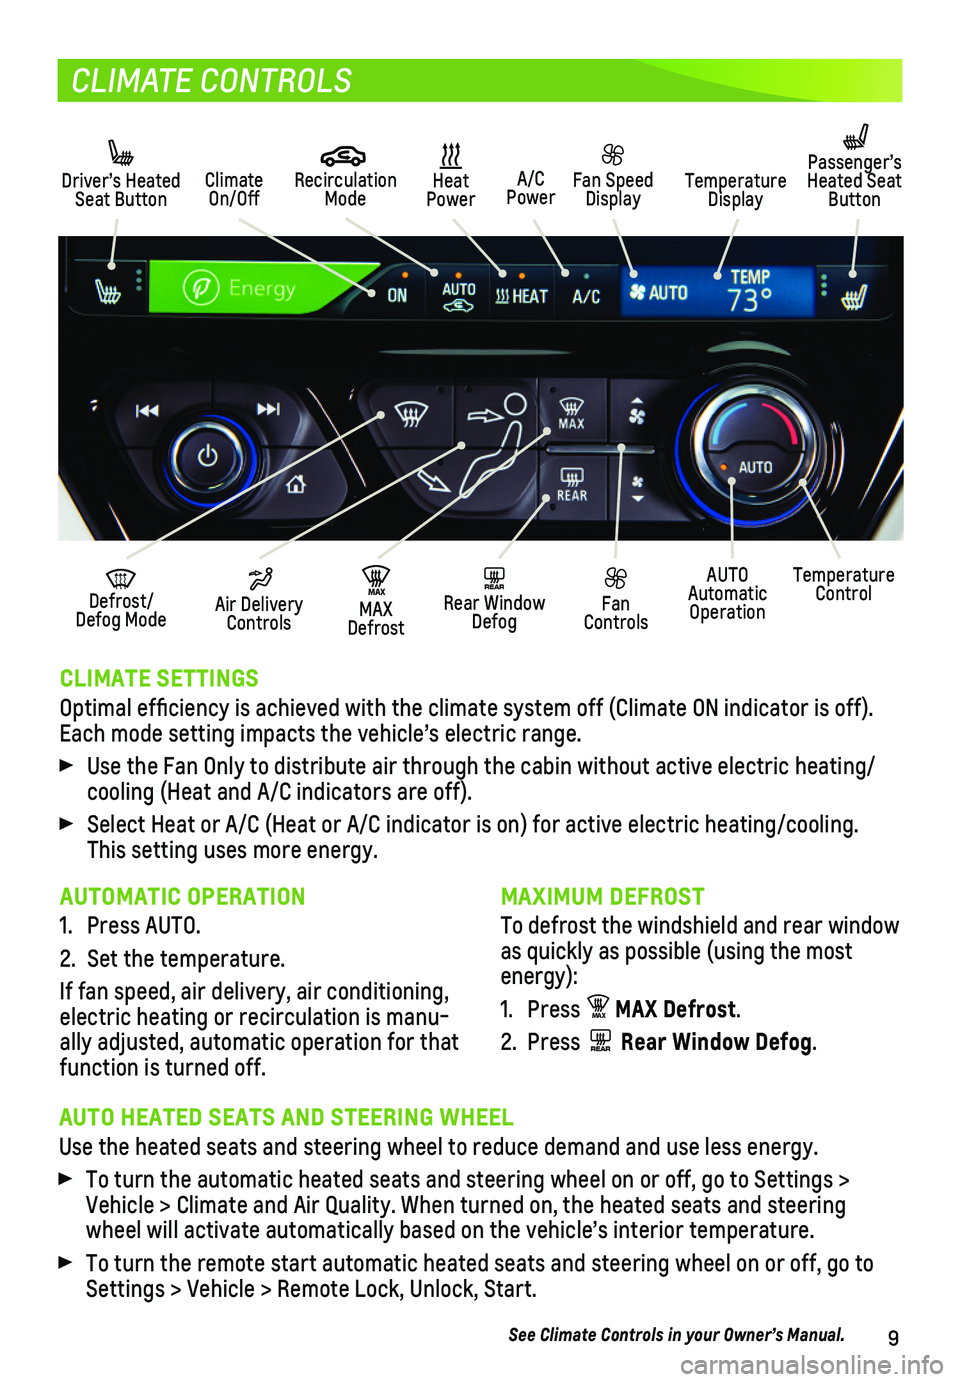 CHEVROLET BOLT EV 2021  Get To Know Guide 9
CLIMATE CONTROLS
CLIMATE SETTINGS 
Optimal efficiency is achieved with the climate system off (Climate O\
N indicator is off). Each mode setting impacts the vehicle’s electric range. 
 Use the Fan